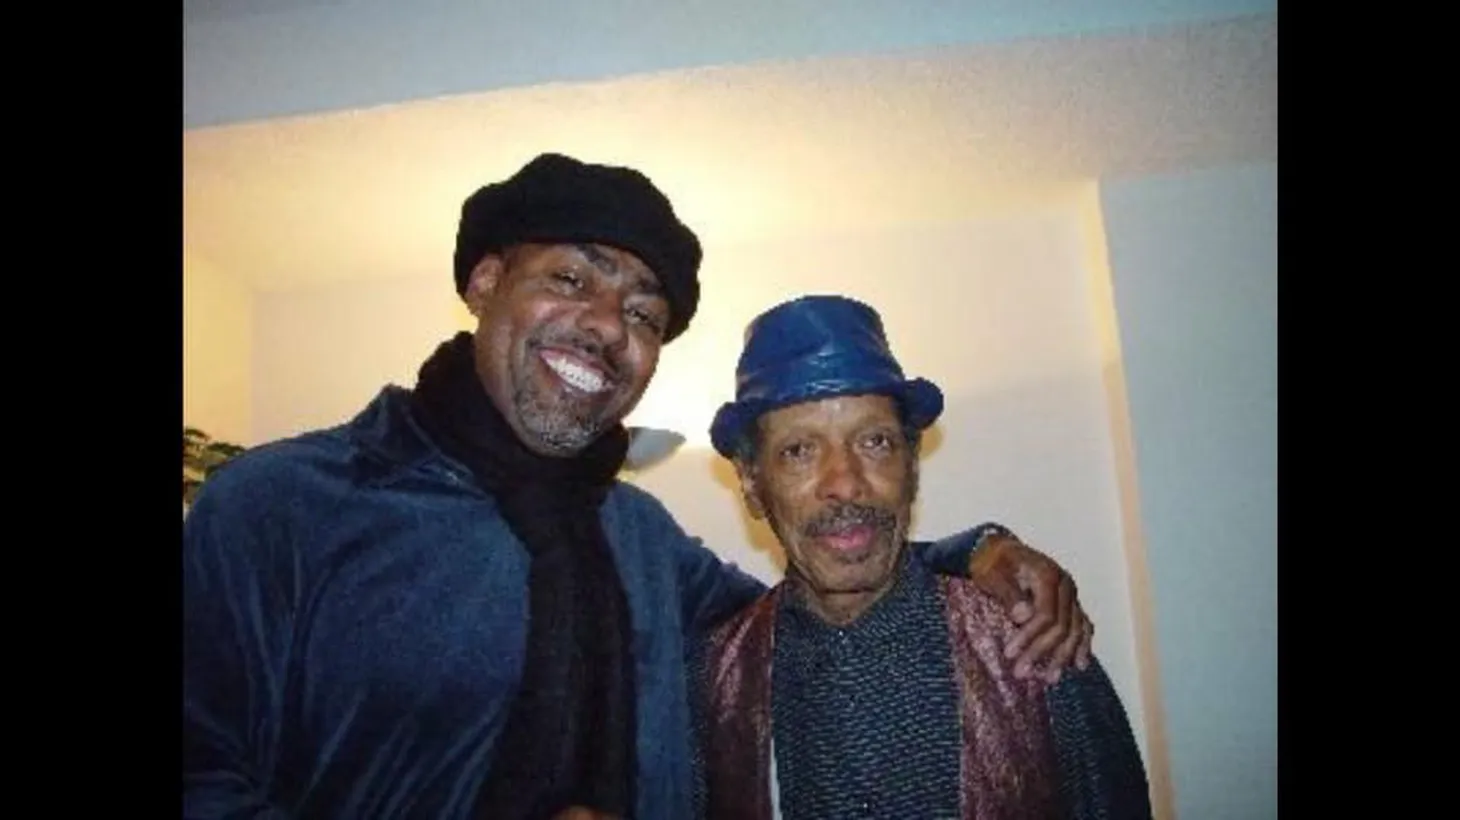 LeRoy Downs and Ornette Coleman